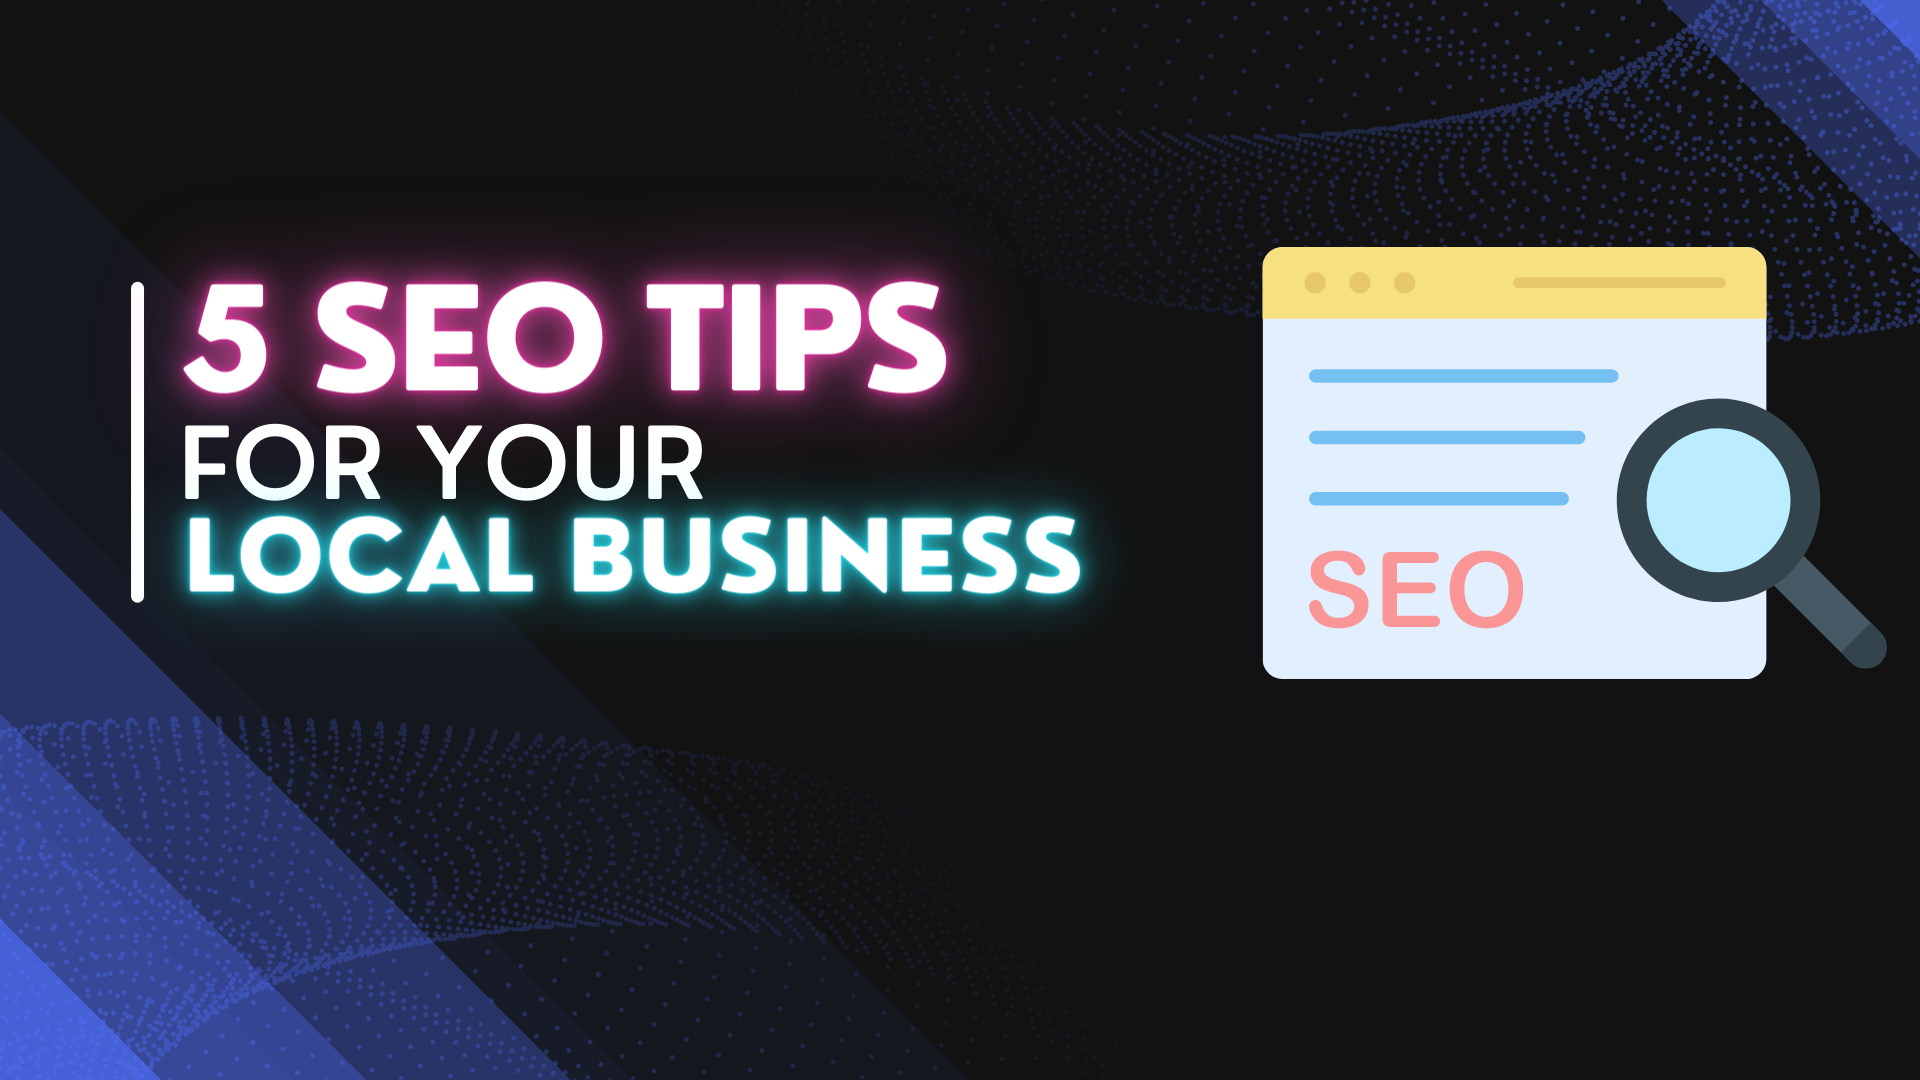 5 SEO Tips for Local Businesses